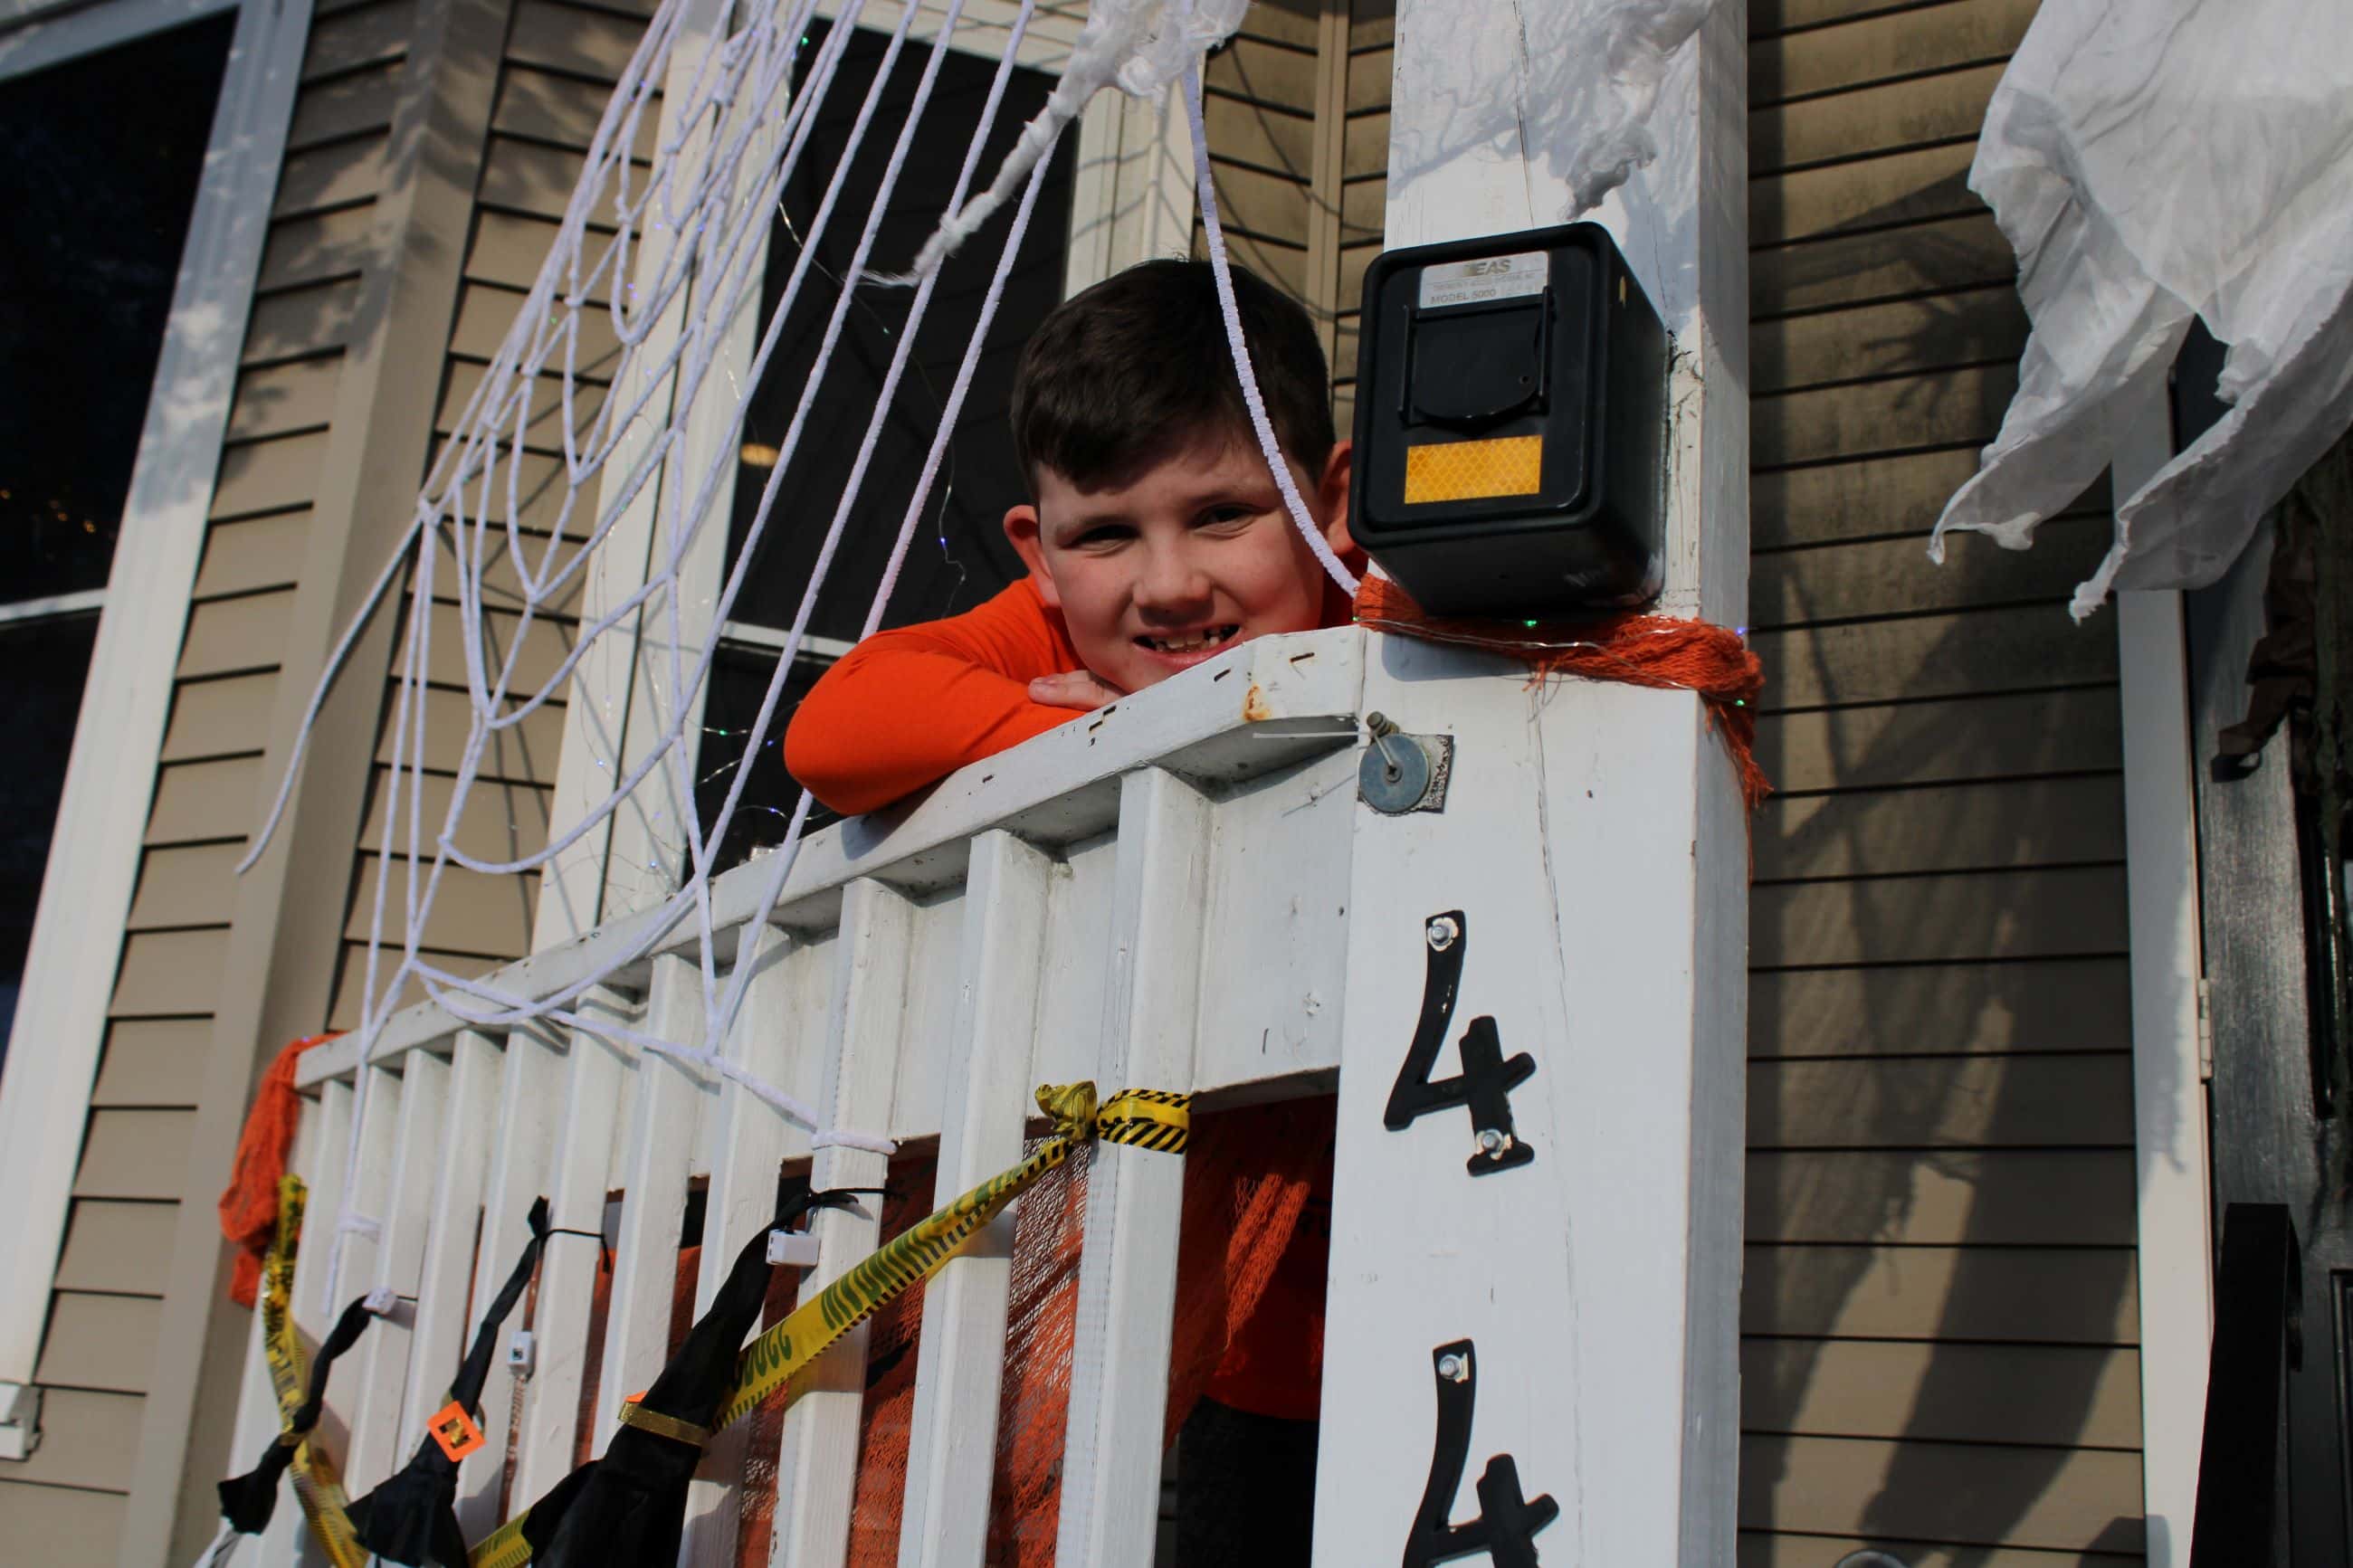 Westborough offers a sweet time for trick-or-treaters